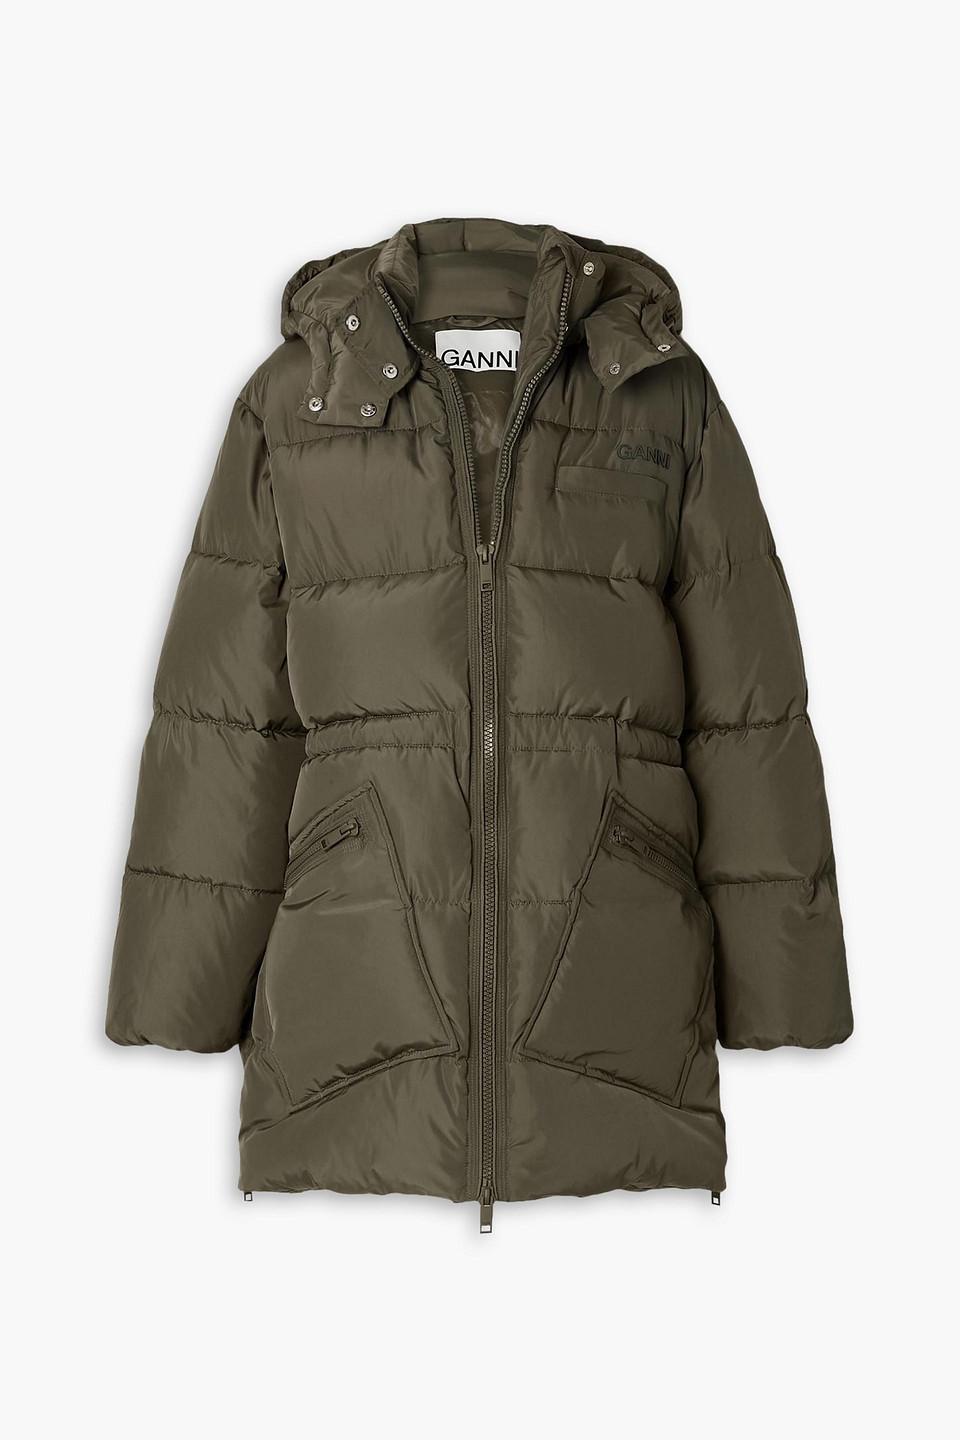 Ganni Oversized Quilted Shell Jacket in Green | Lyst